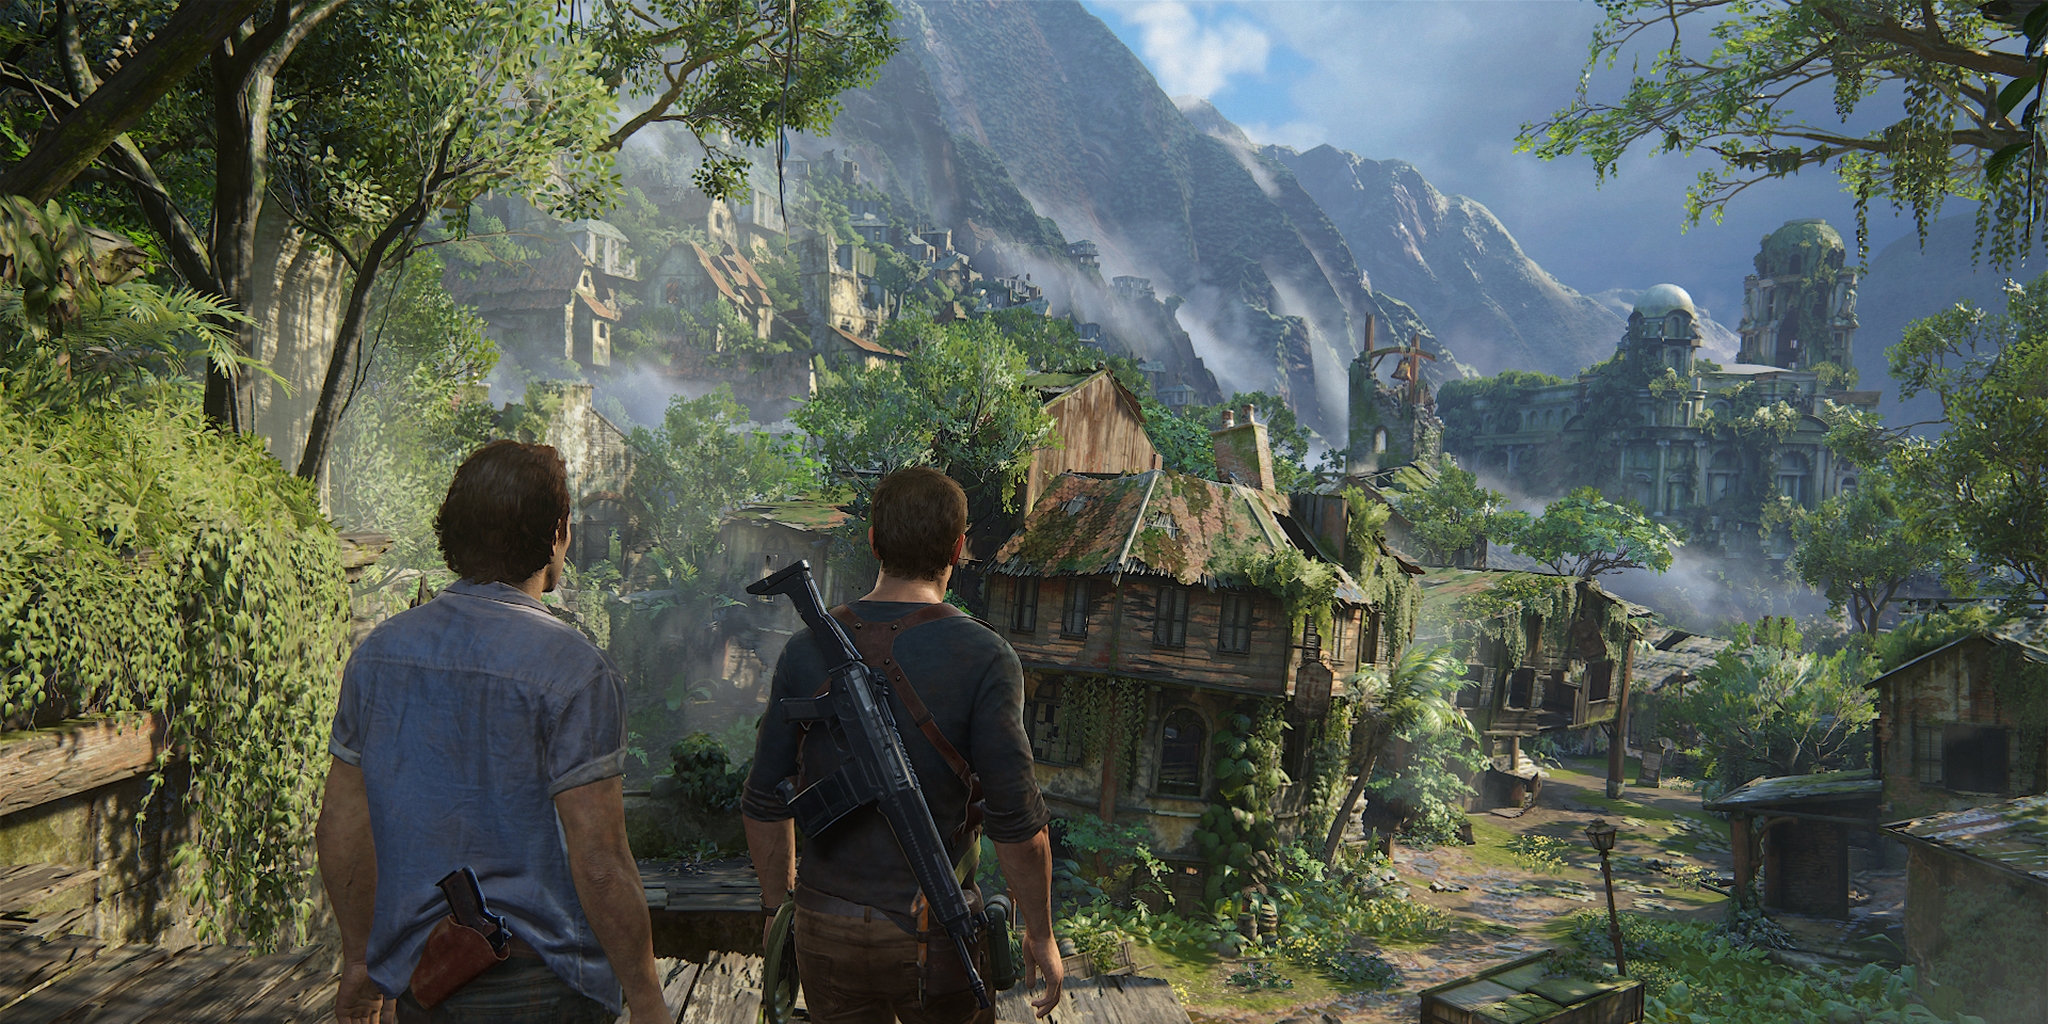 uncharted 4 pc download completo portugues